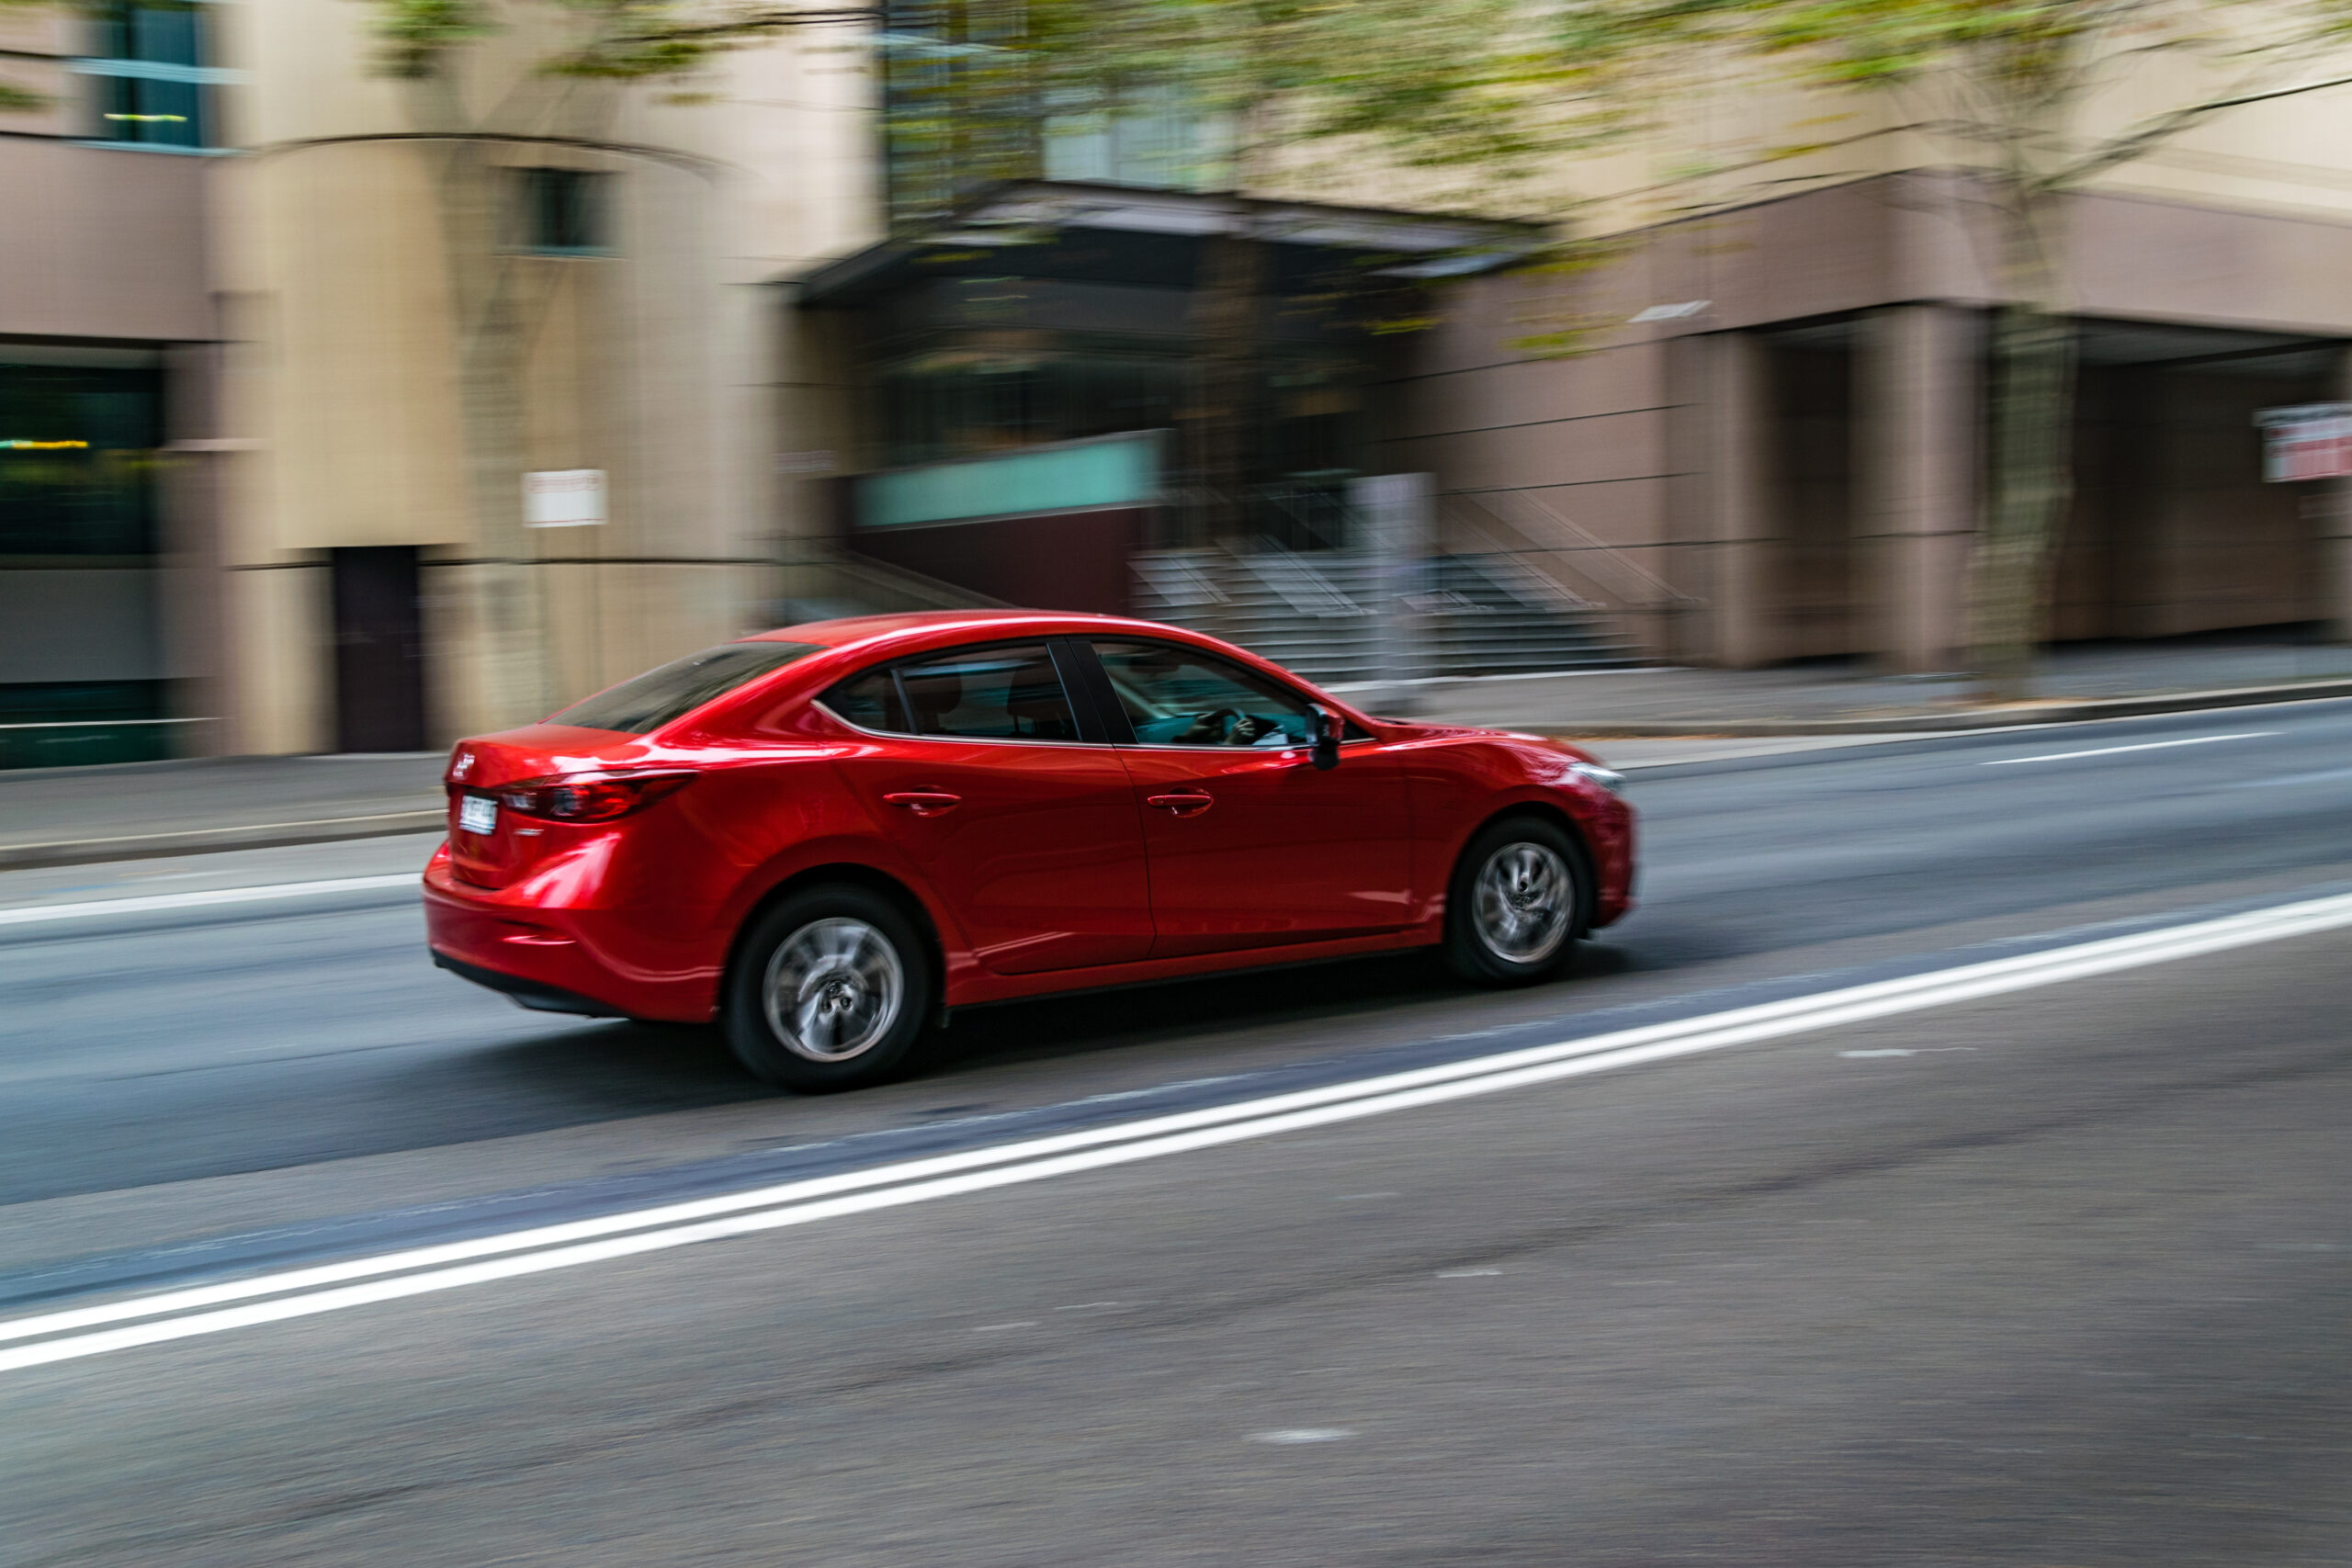 A red sedan in motion, captured with a slow shutter speed to create a motion blur effect, speeding along a city street lined with modern buildings in an unsafe lane.